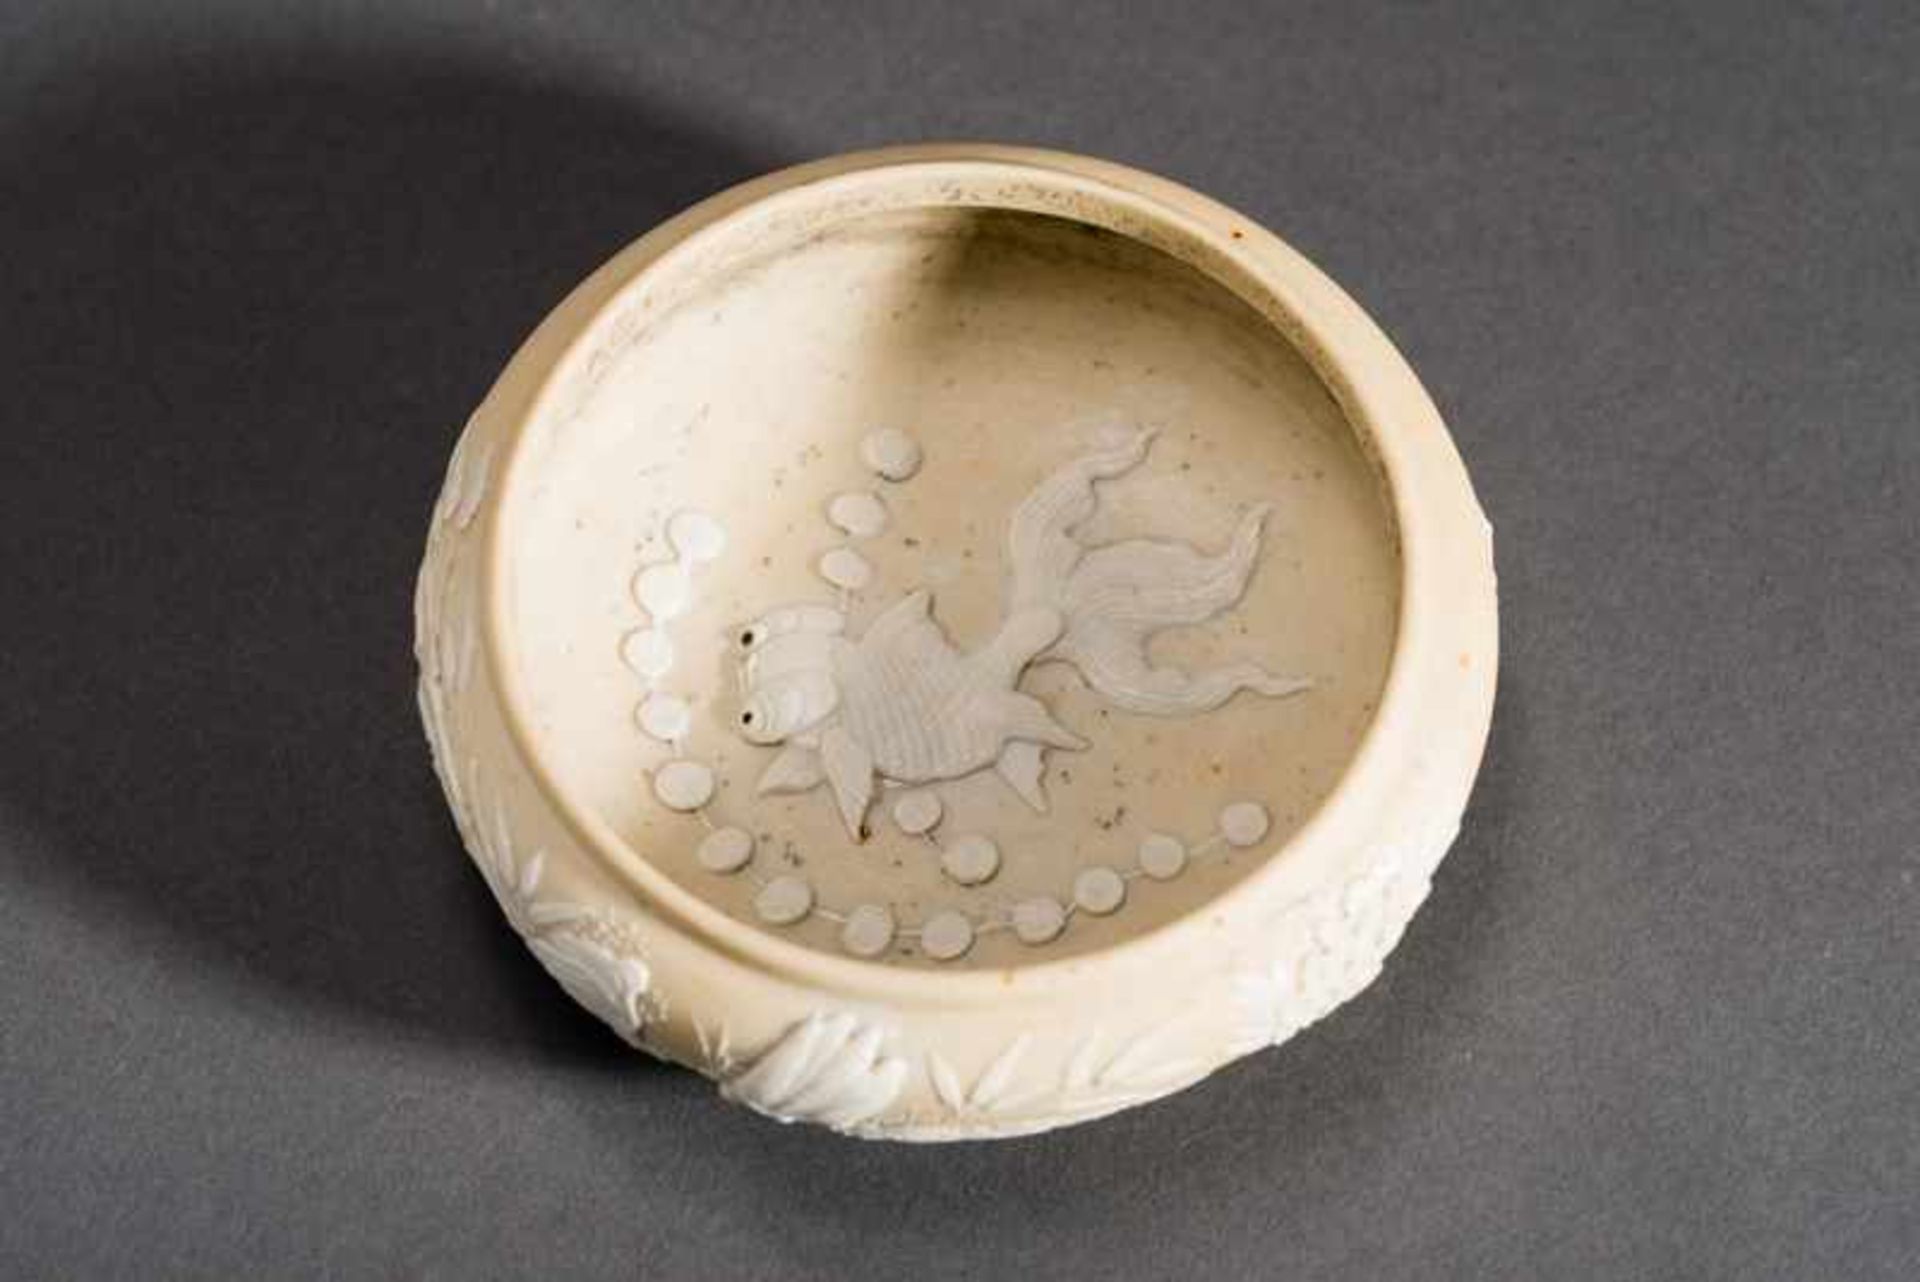 BOWL FEATURING BLOSSOMS, BEETLES, FISH Unglazed porcelain with fused decoration. China, Qing dynasty - Image 6 of 7